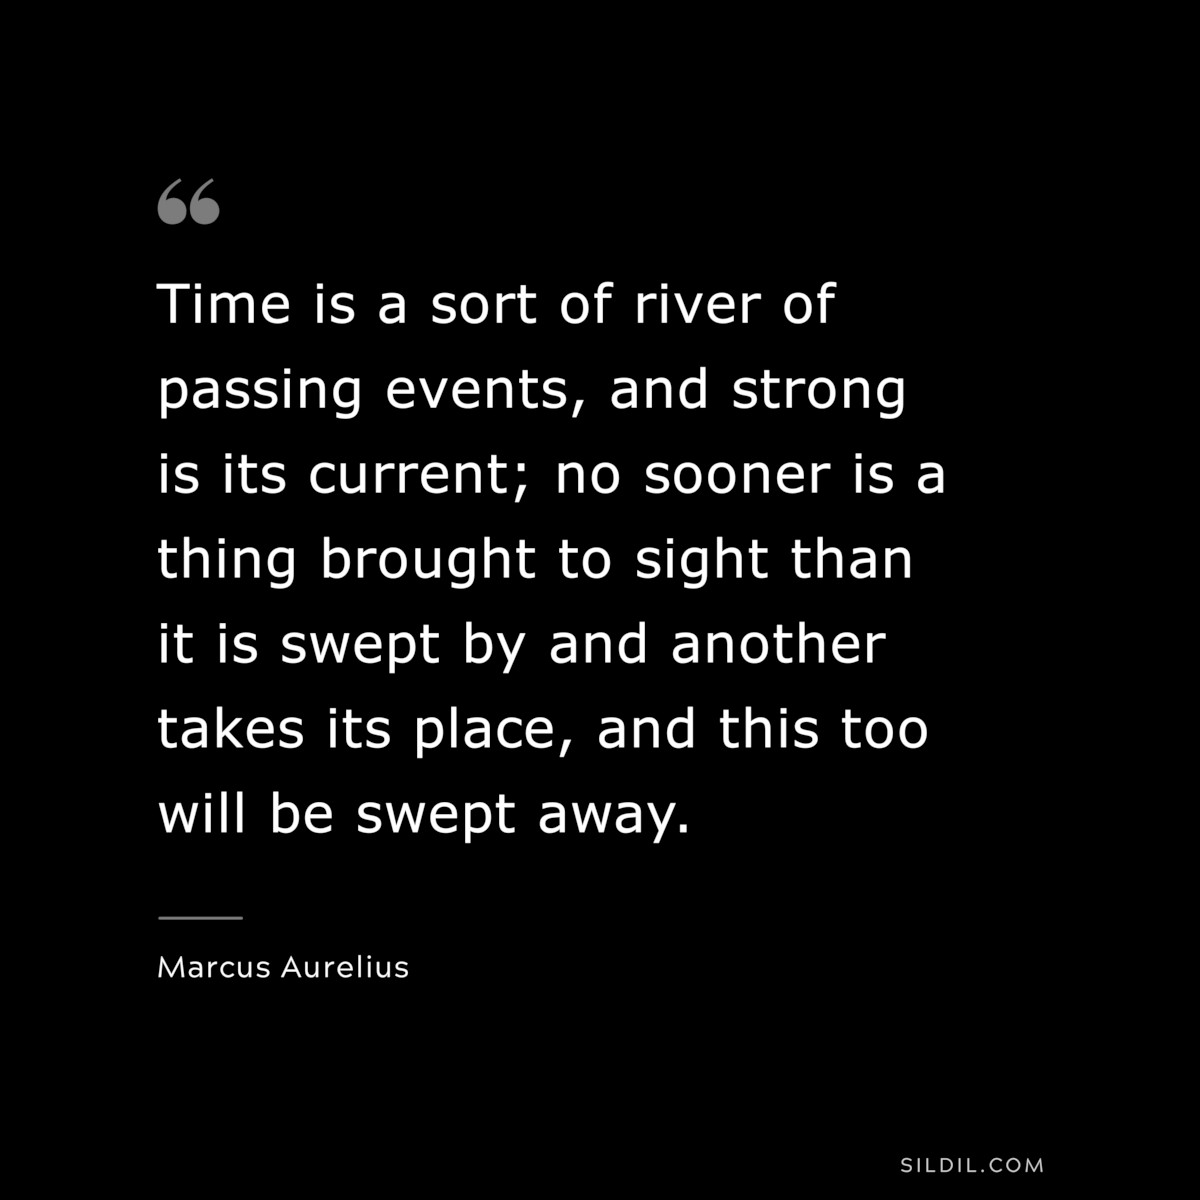 Time is a sort of river of passing events, and strong is its current; no sooner is a thing brought to sight than it is swept by and another takes its place, and this too will be swept away. ― Marcus Aurelius